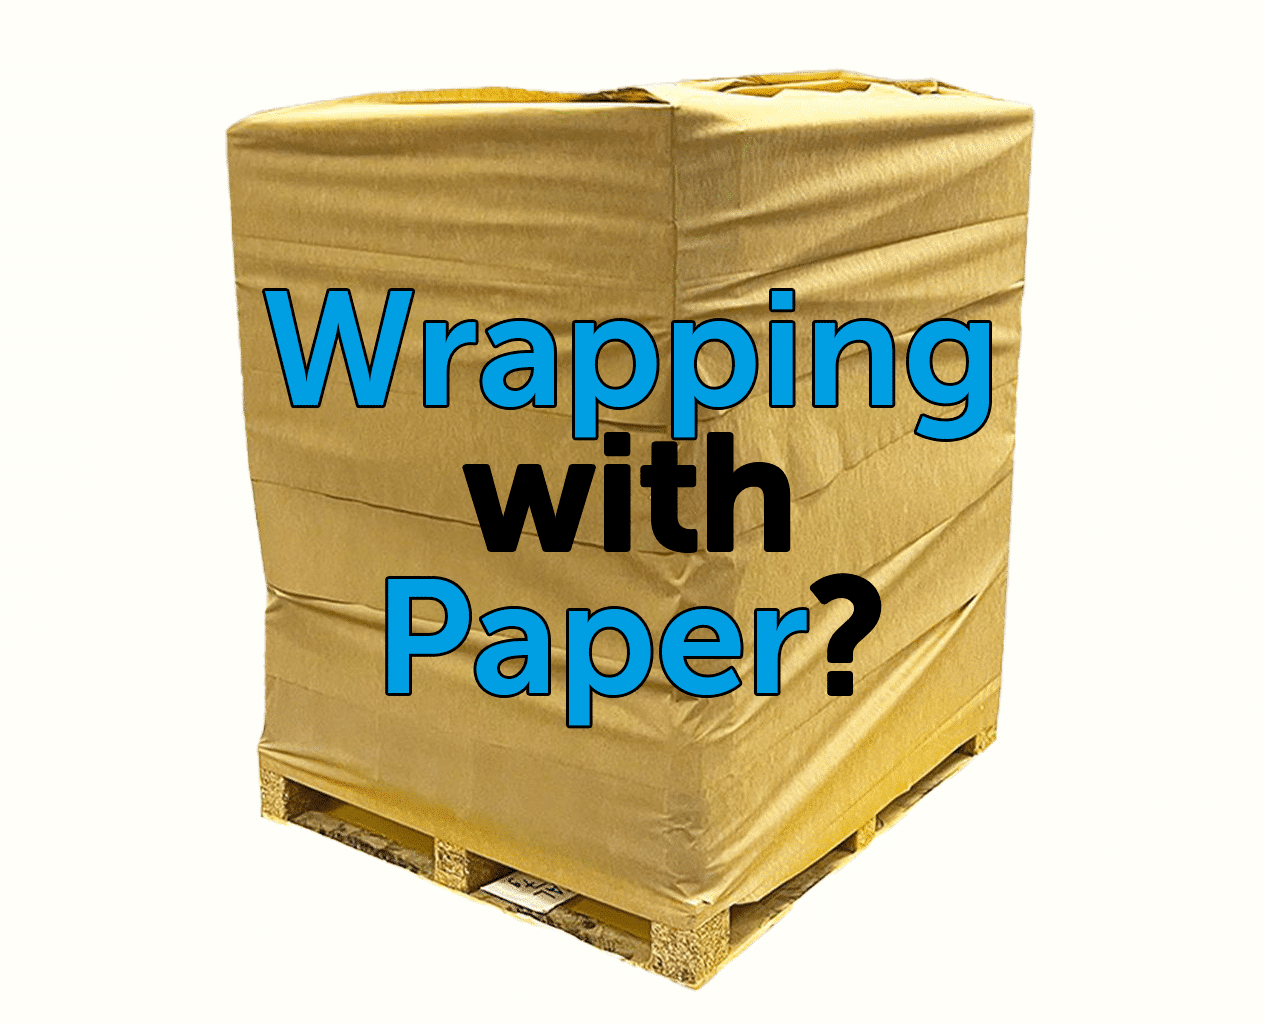 Wrapping with paper